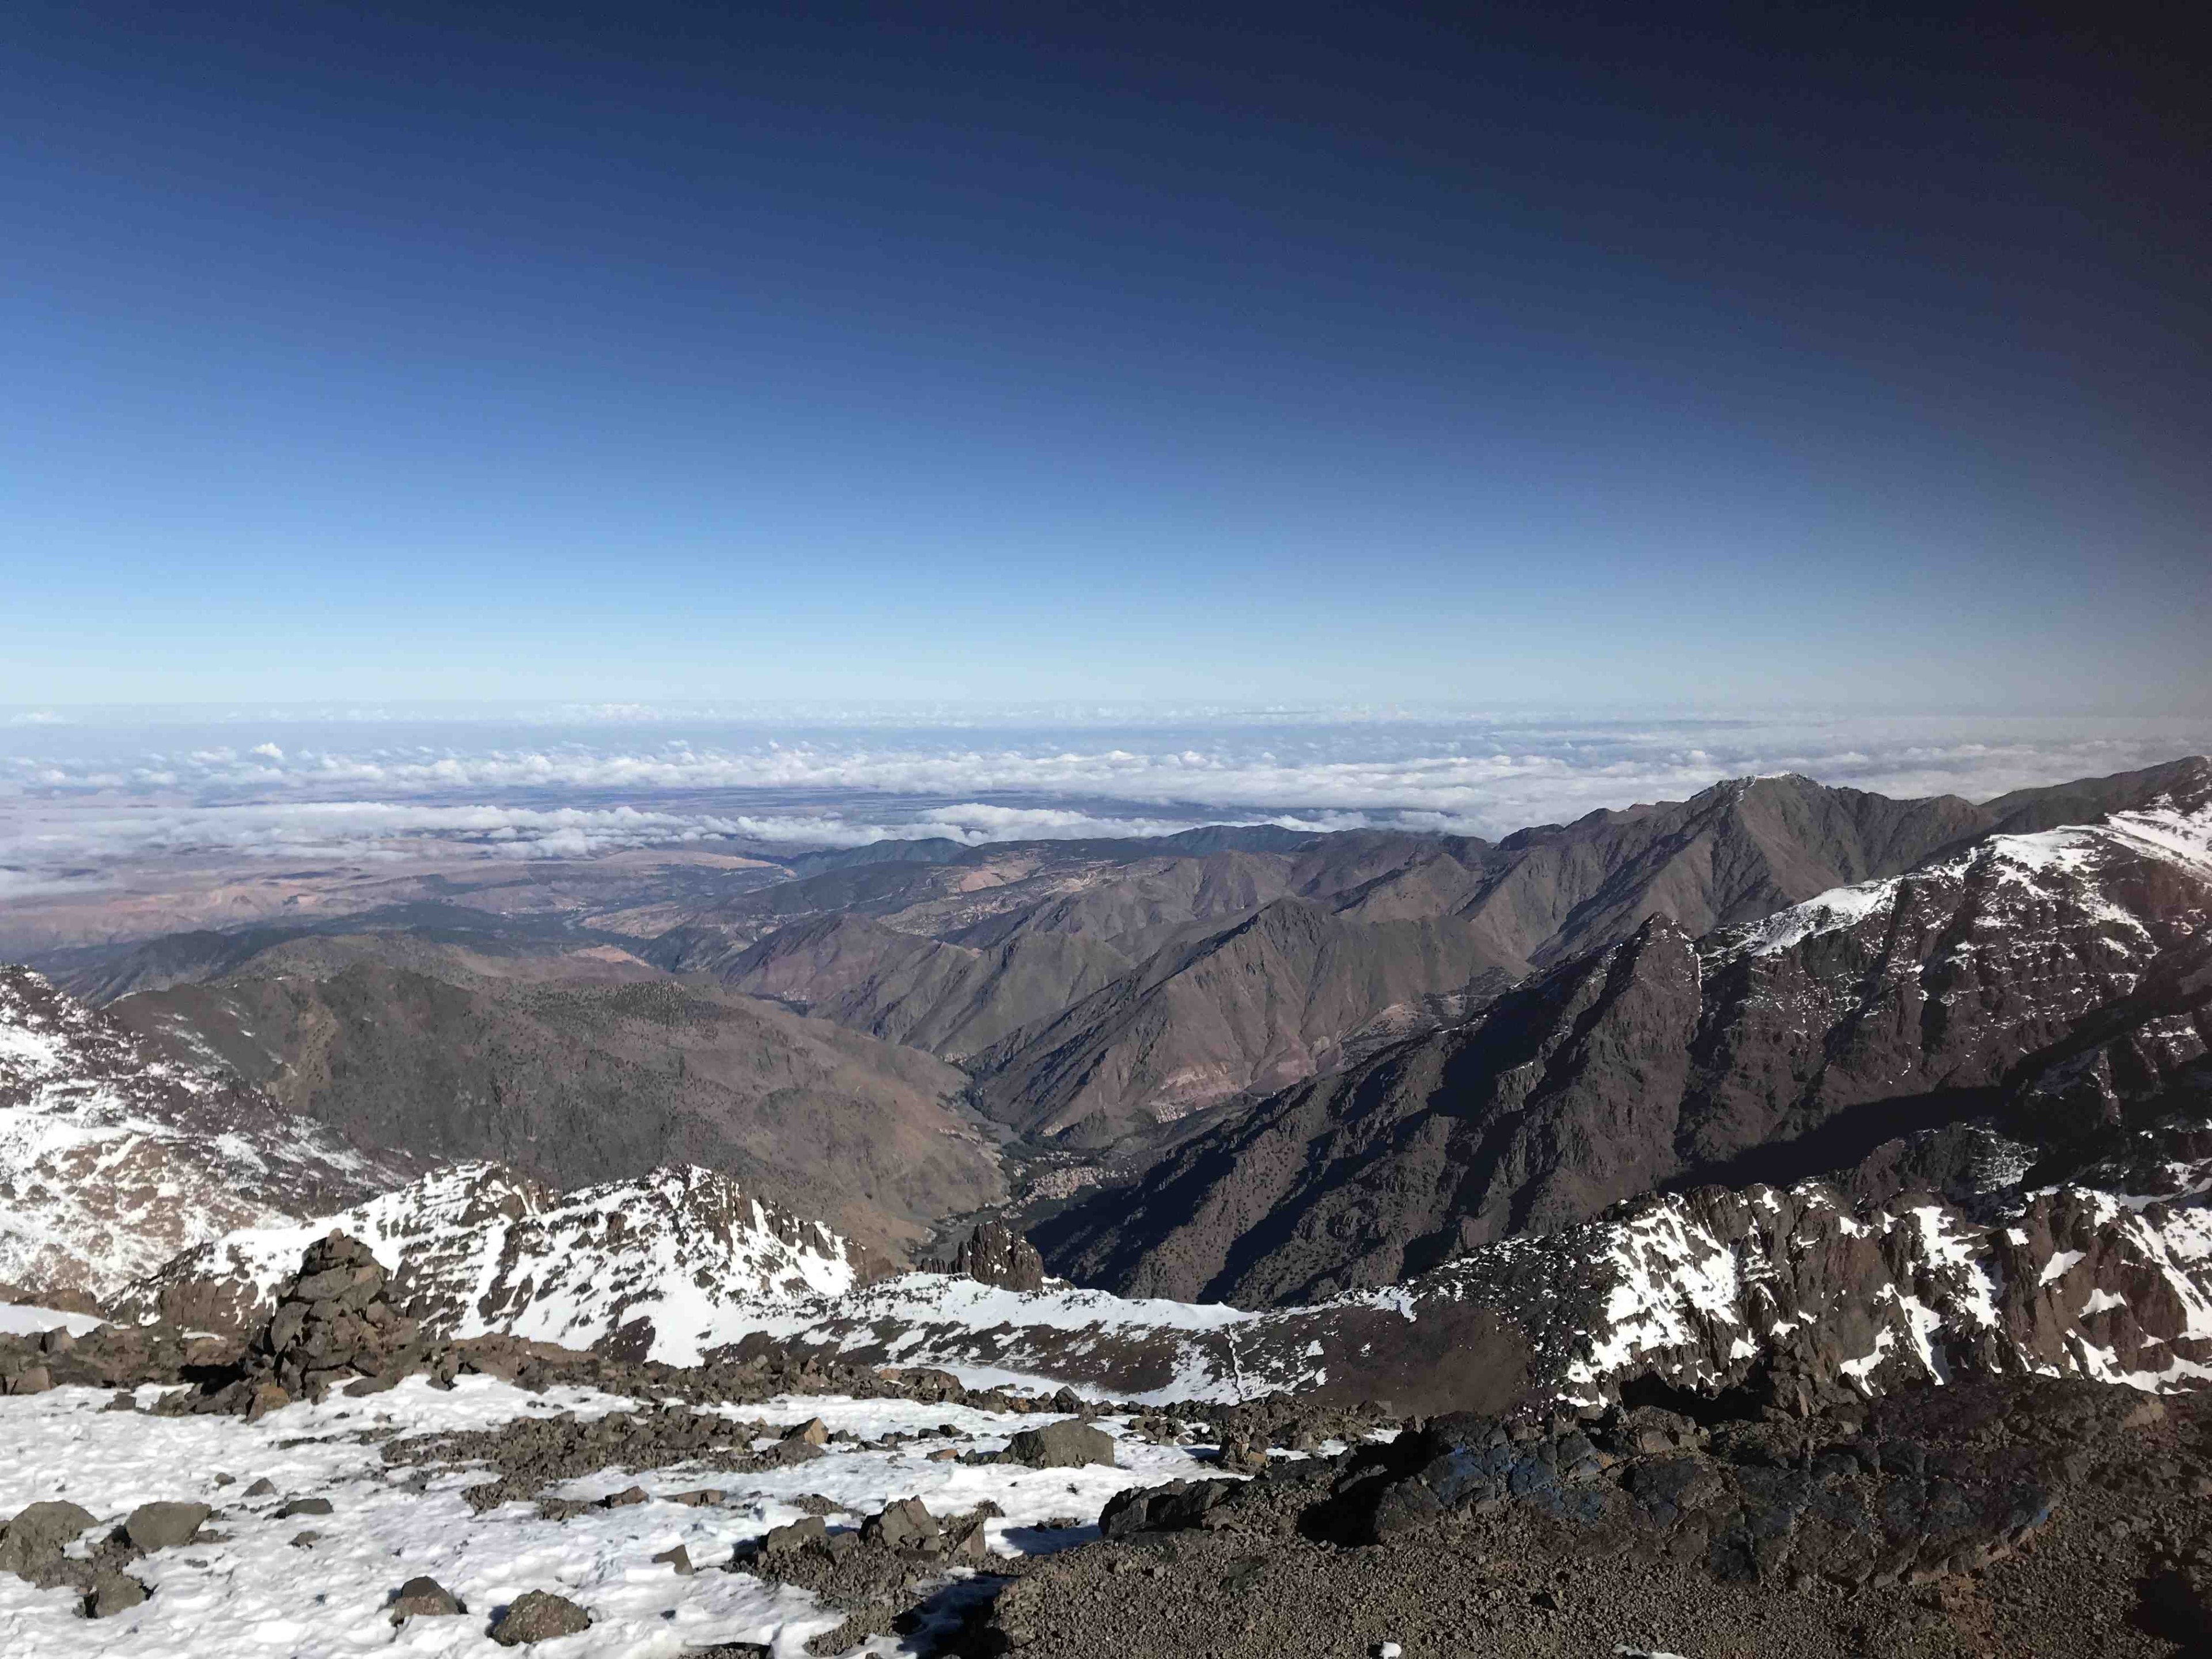 Amazing view from Toubkal. A little bit windy but sun was present :-) such a nice feeling of accomplishment !! #lifeatexpedia